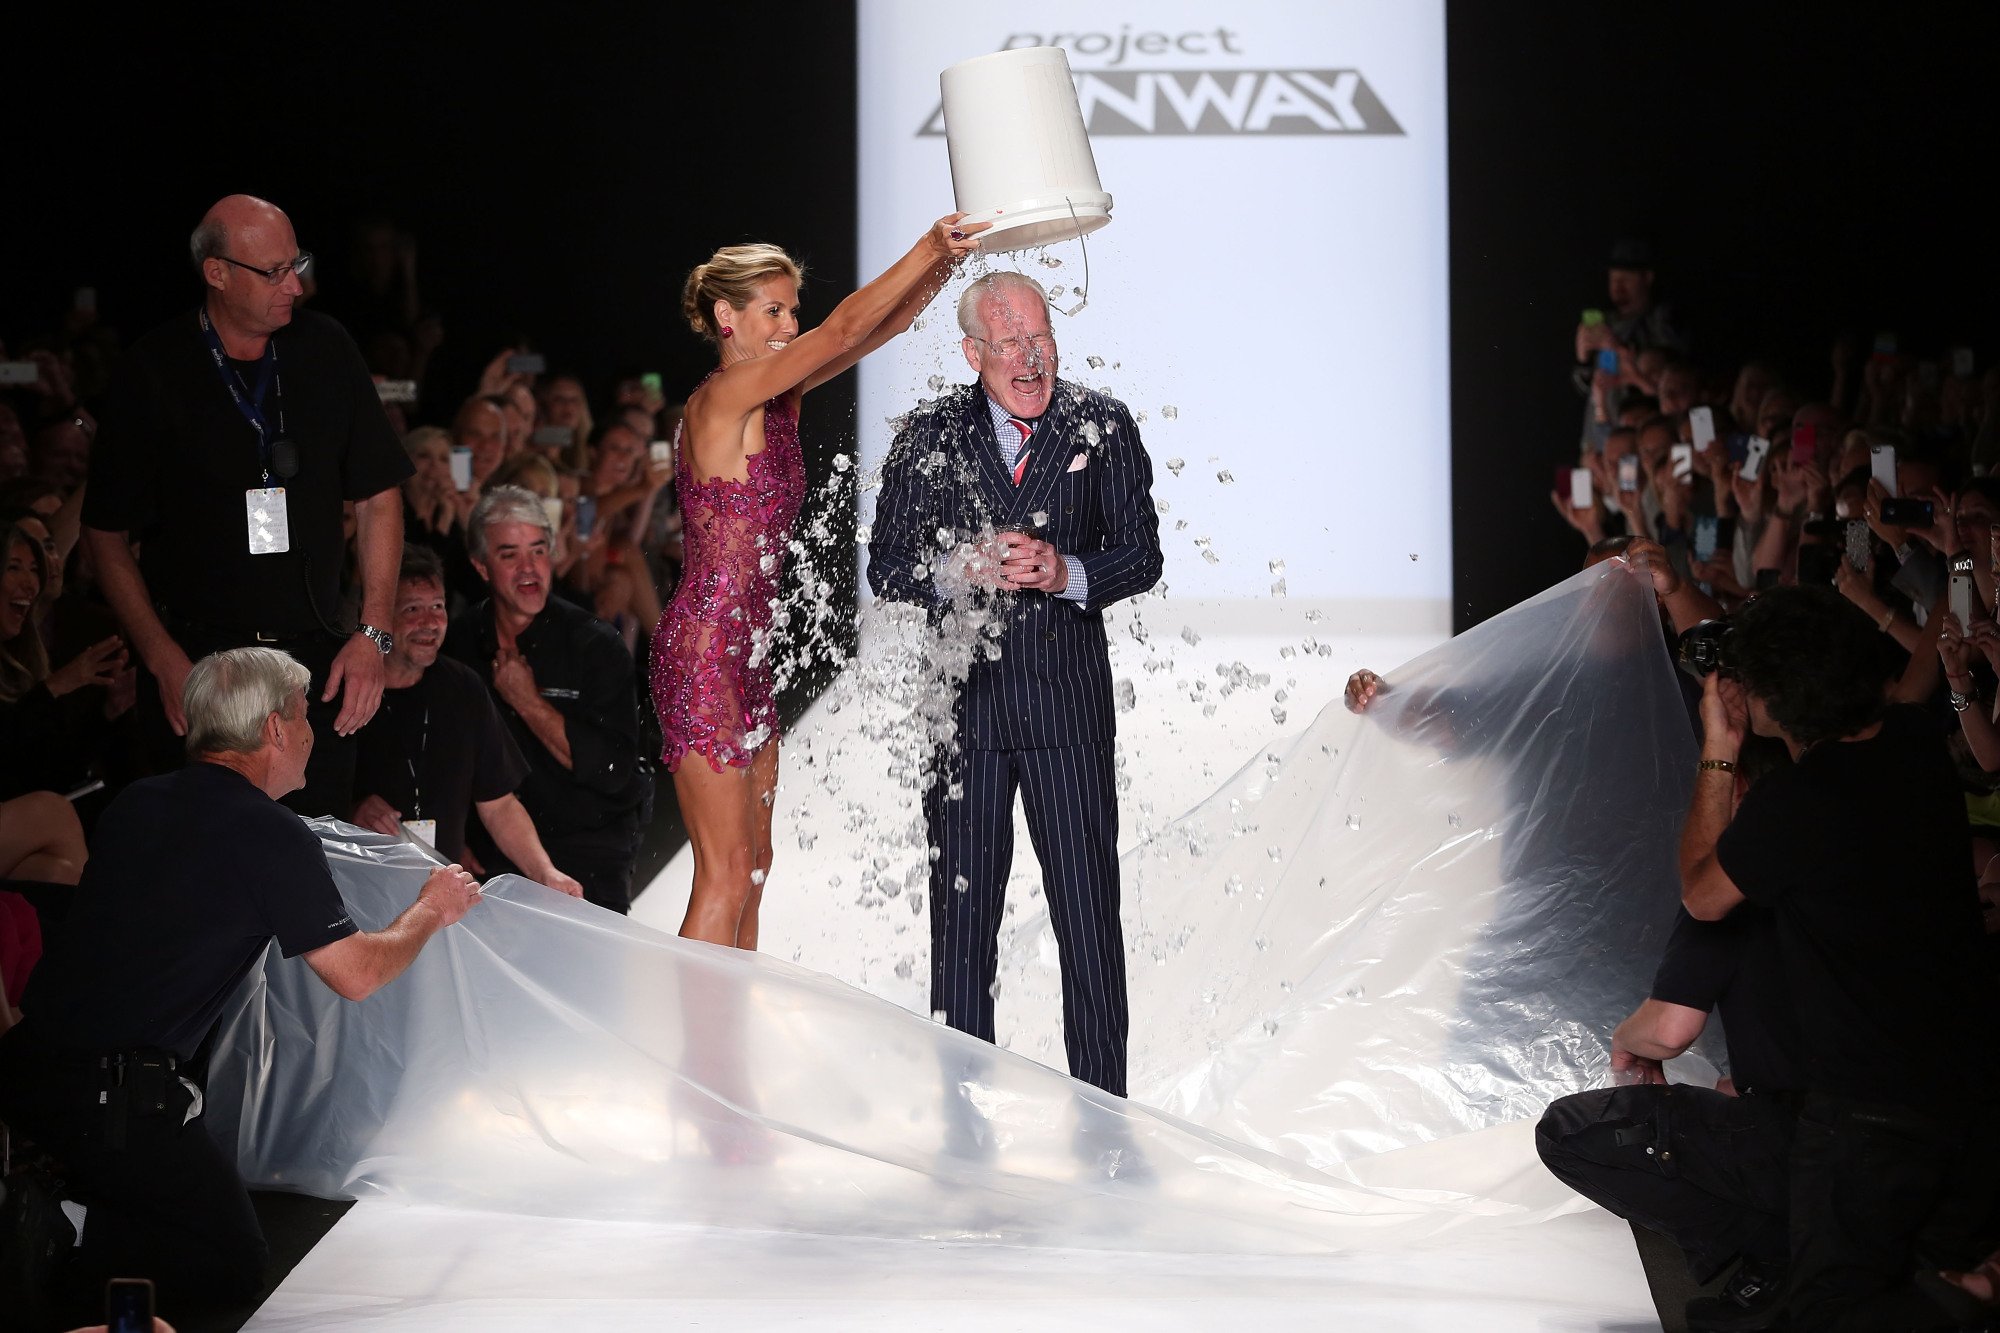 Heidi Klum (in a dark pink sequin dress) dumps a bucket of ice water on Tim Gunn (in a suit) at the Project Runway Season 13 Finale Show on September 5, 2014. They are on a white runway.